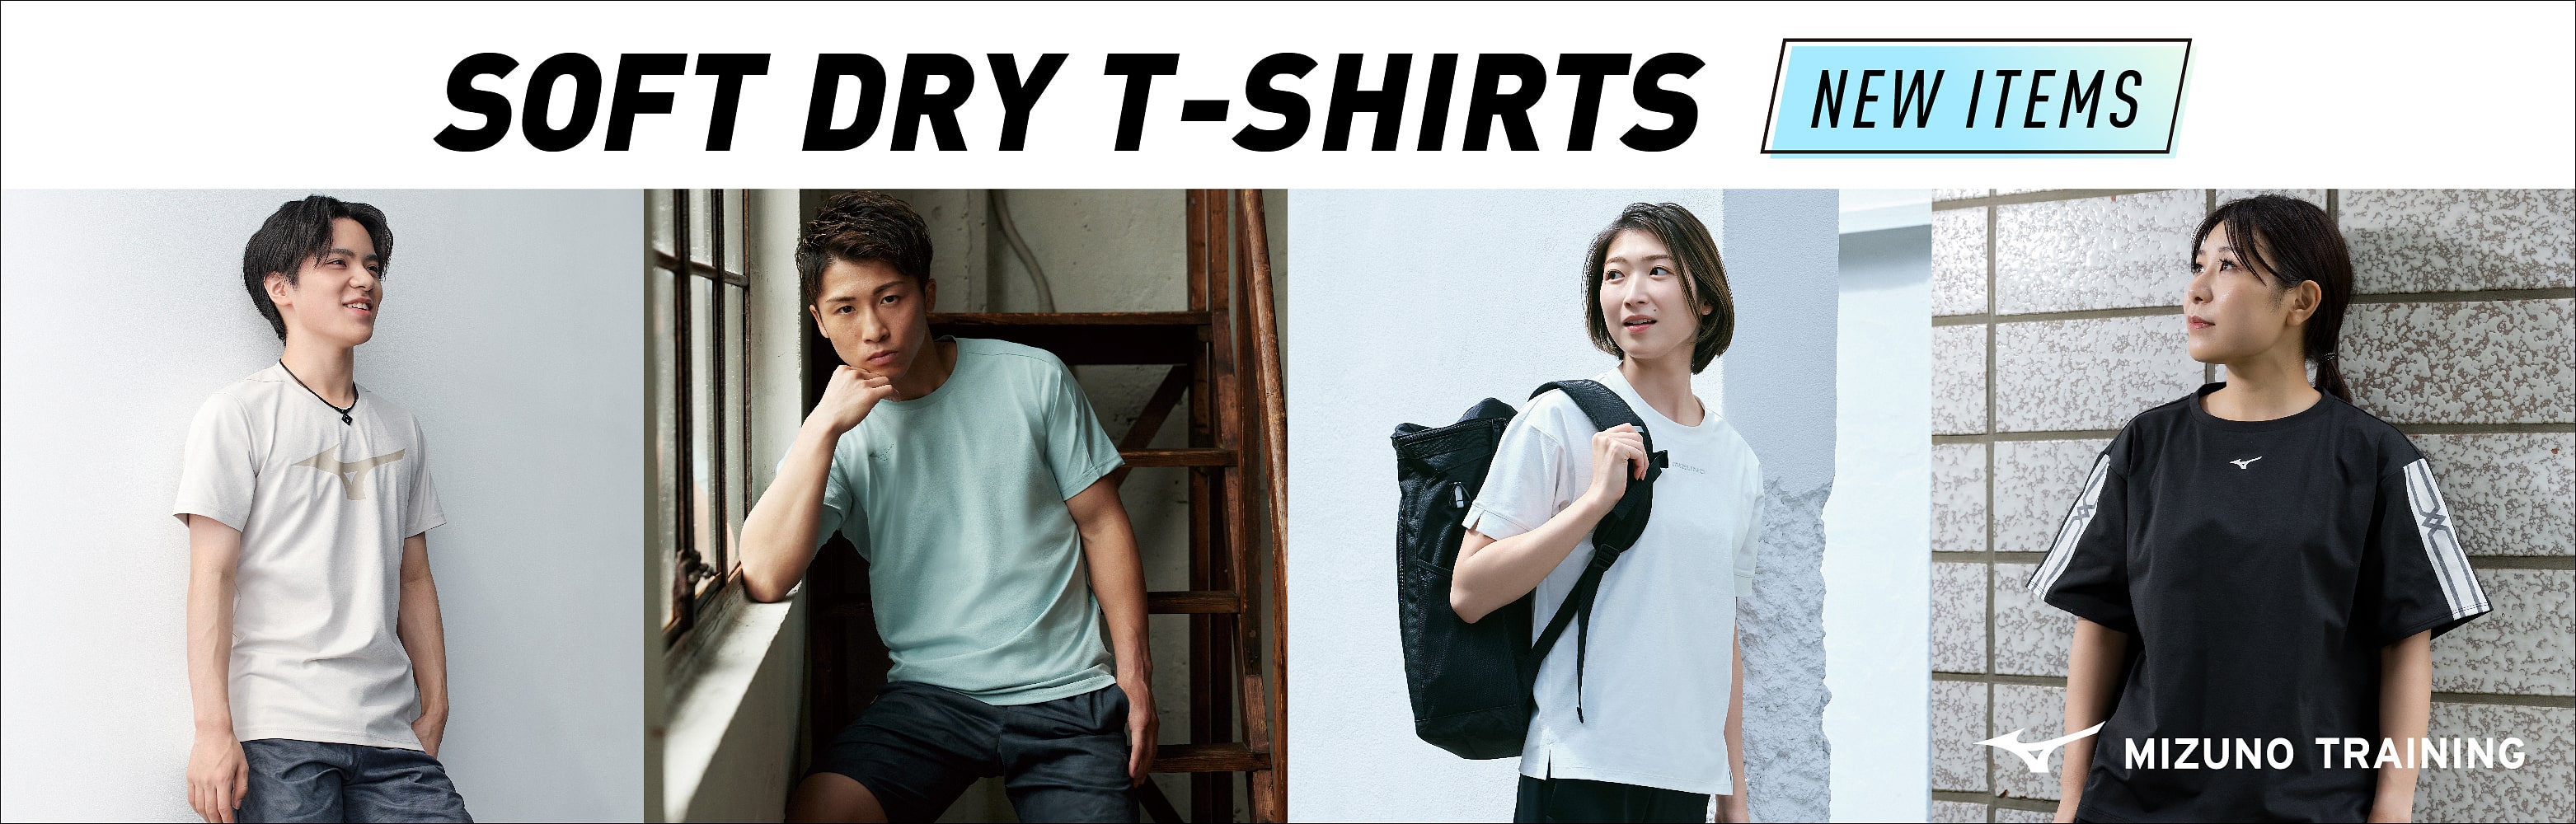 SOFT DRY T-SHIRTS NEW ITEMS